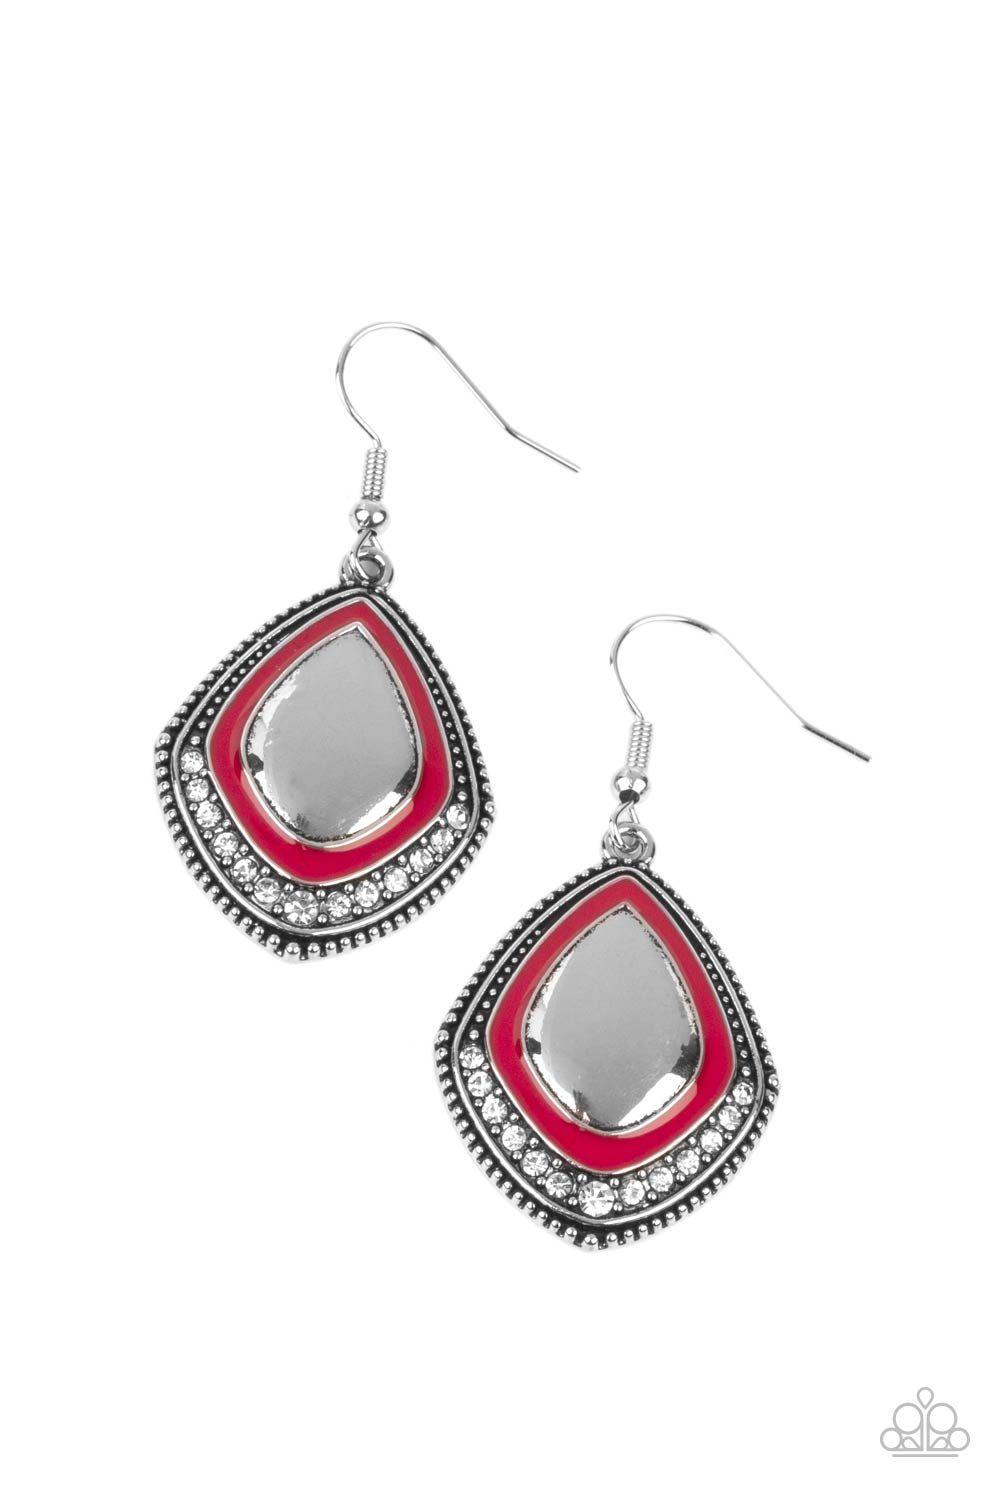 Fearlessly Feminine - Red and Silver Earrings - Paparazzi Accessories - Painted in a fiery red accent, the bottom of a studded silver frame is bordered in a dainty row of white rhinestones for a fearless finish. Earring attaches to a standard fishhook fitting. Sold as one pair of earrings.